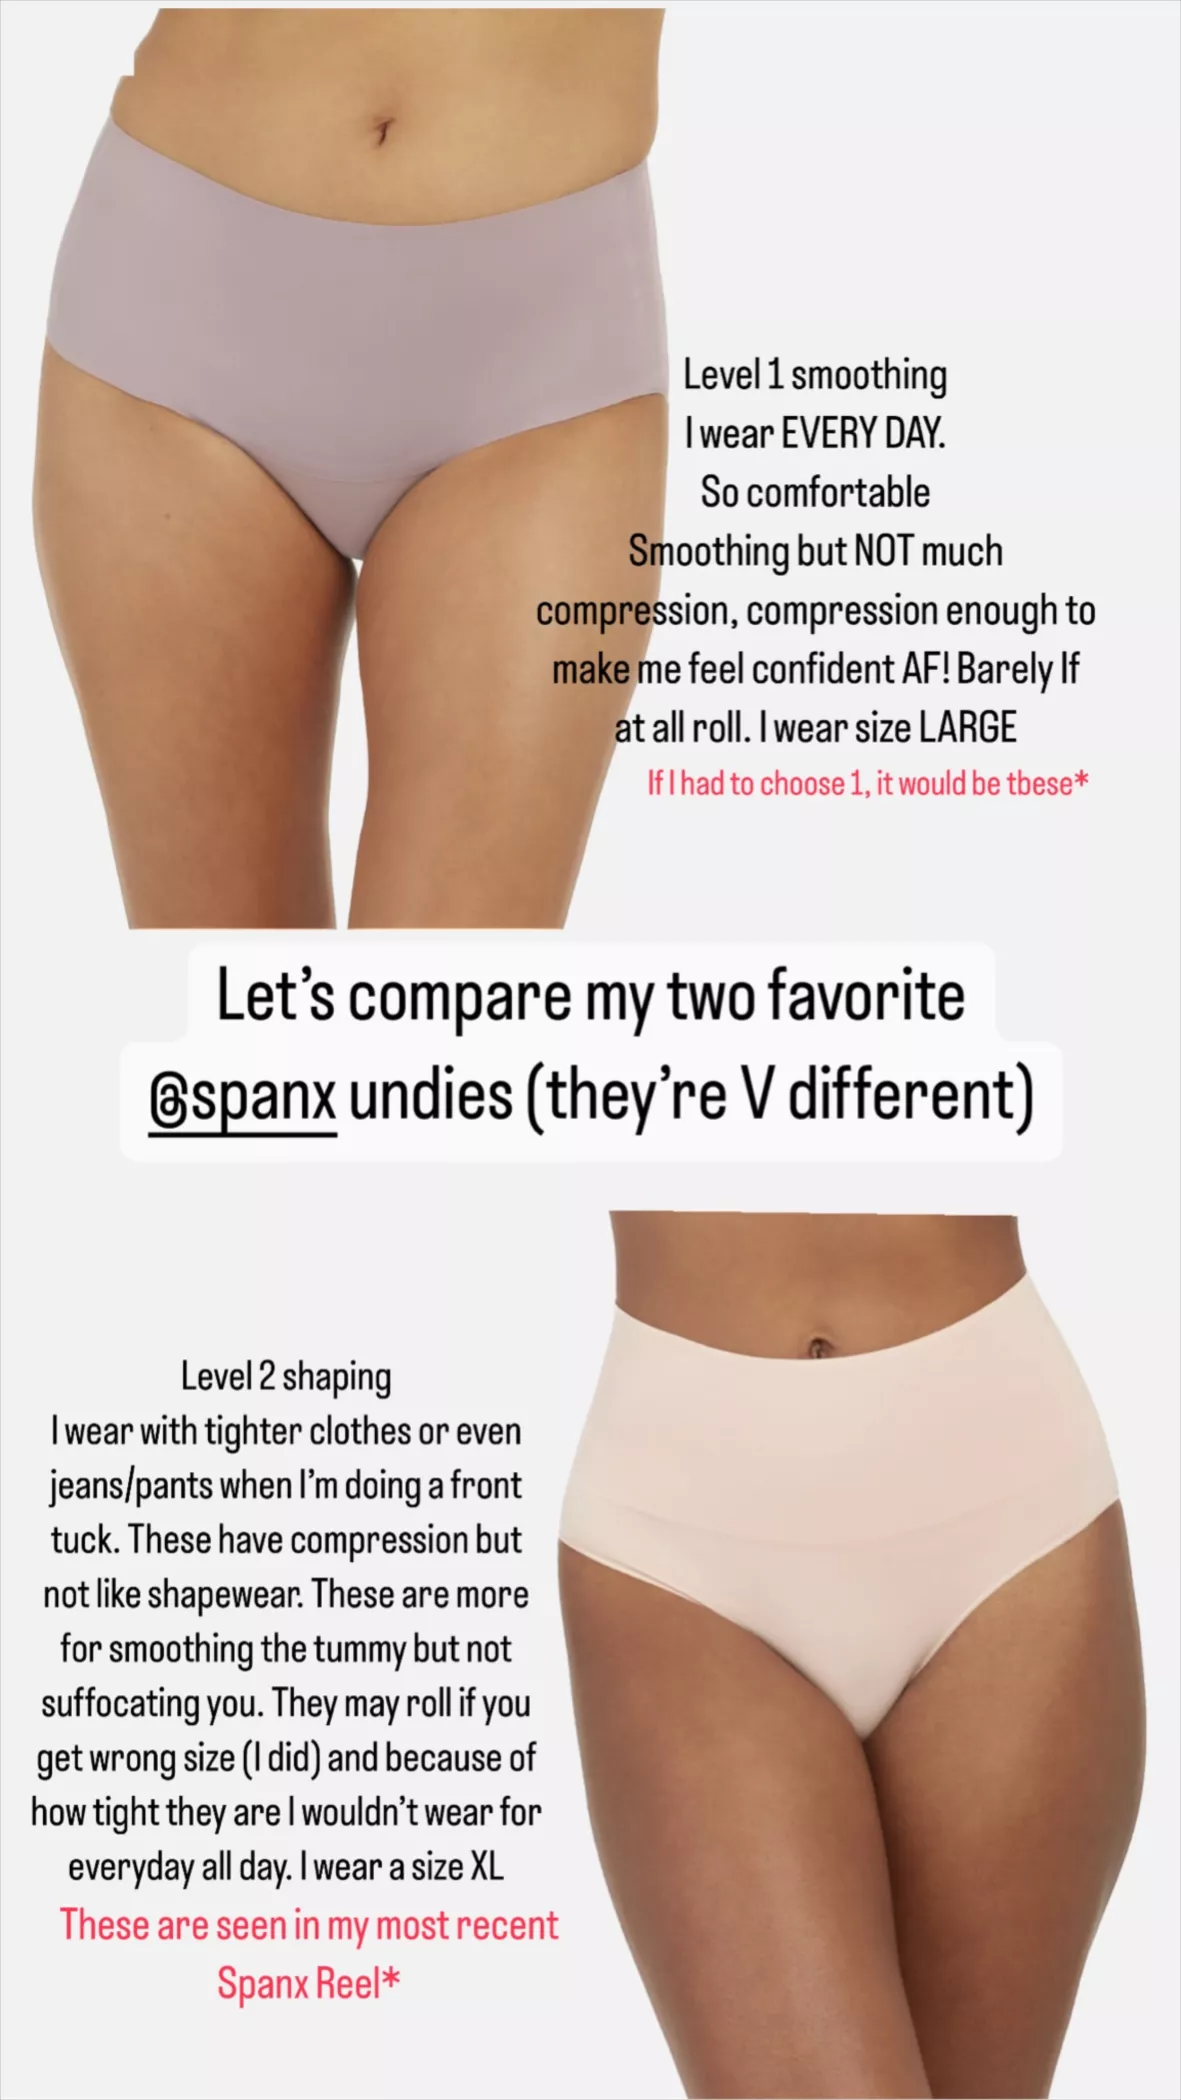 have-you-tried-shapewear-yet